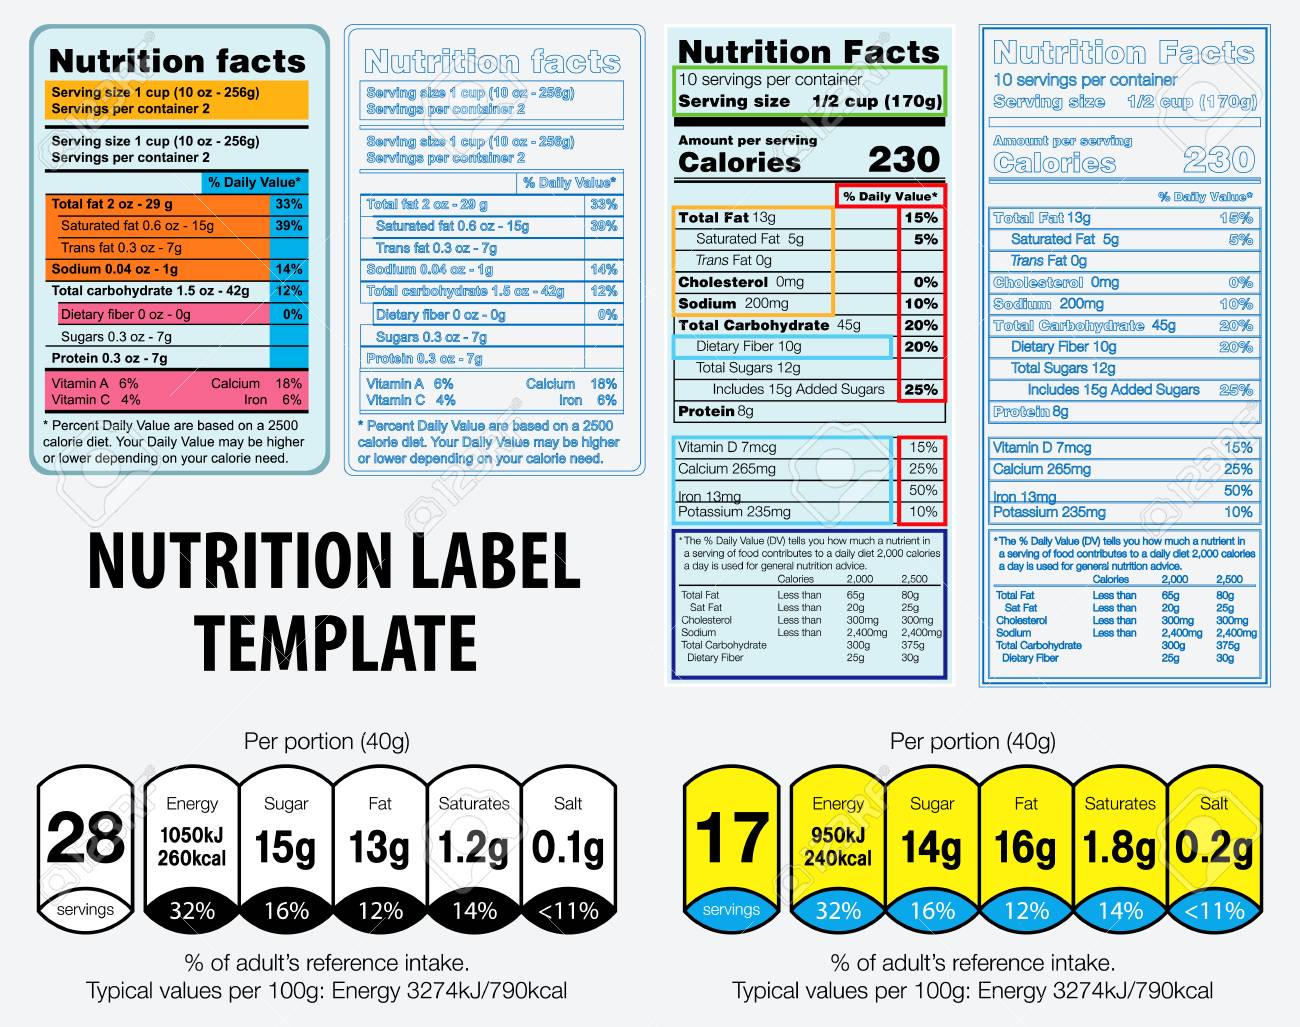 How Important is it to check the nutritional table in a food package?